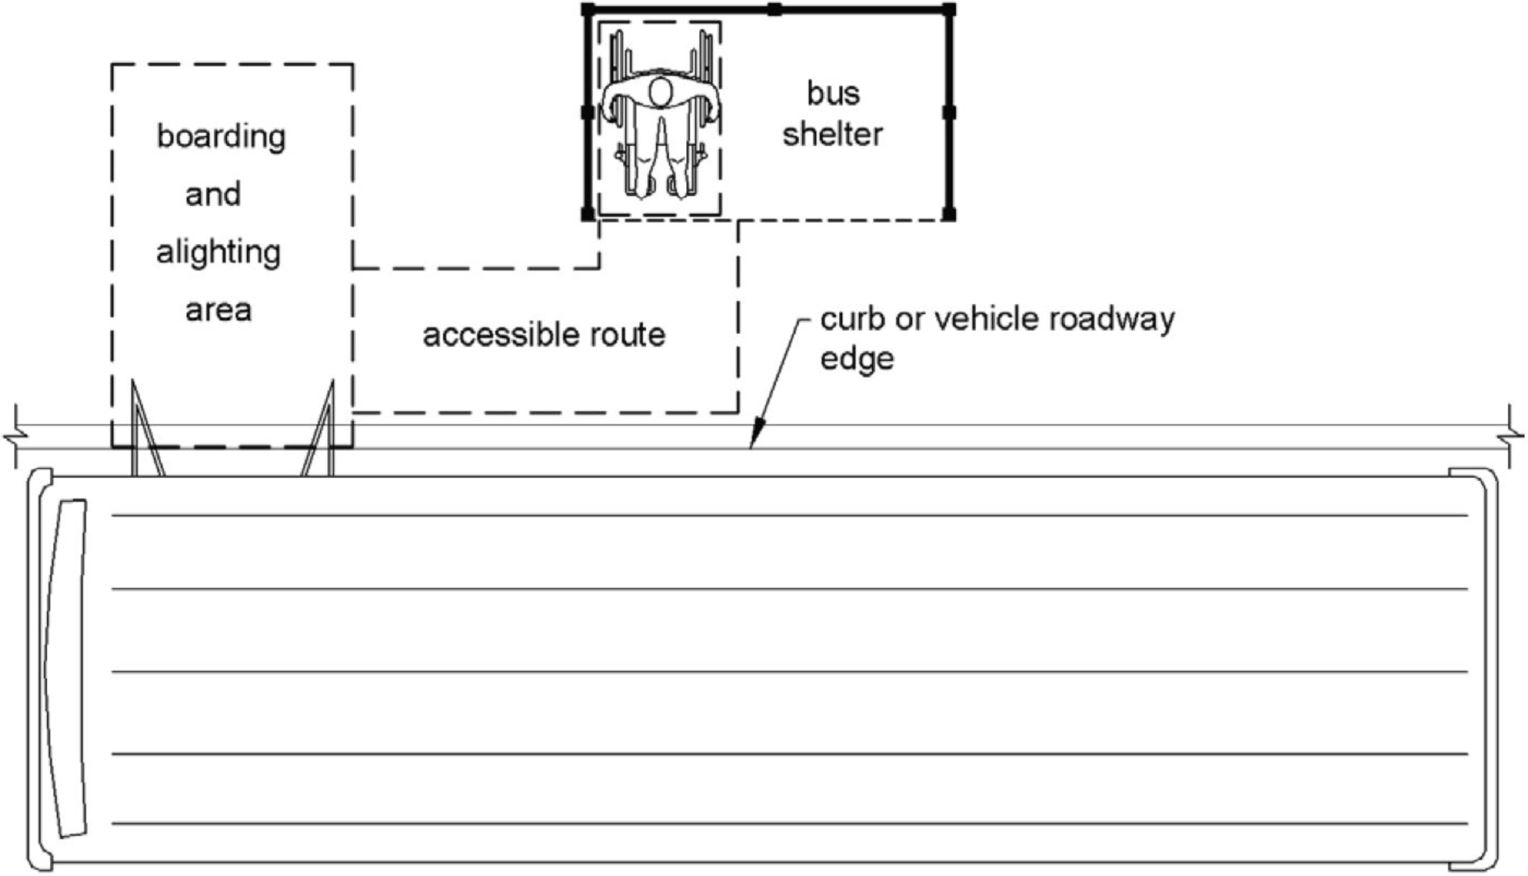 A plan view shows a bus shelter with a person using a wheelchair seated fully within. An accessible route connects the wheelchair seating area within the shelter to the bus boarding and alighting area which, in this case, is outside of the shelter.